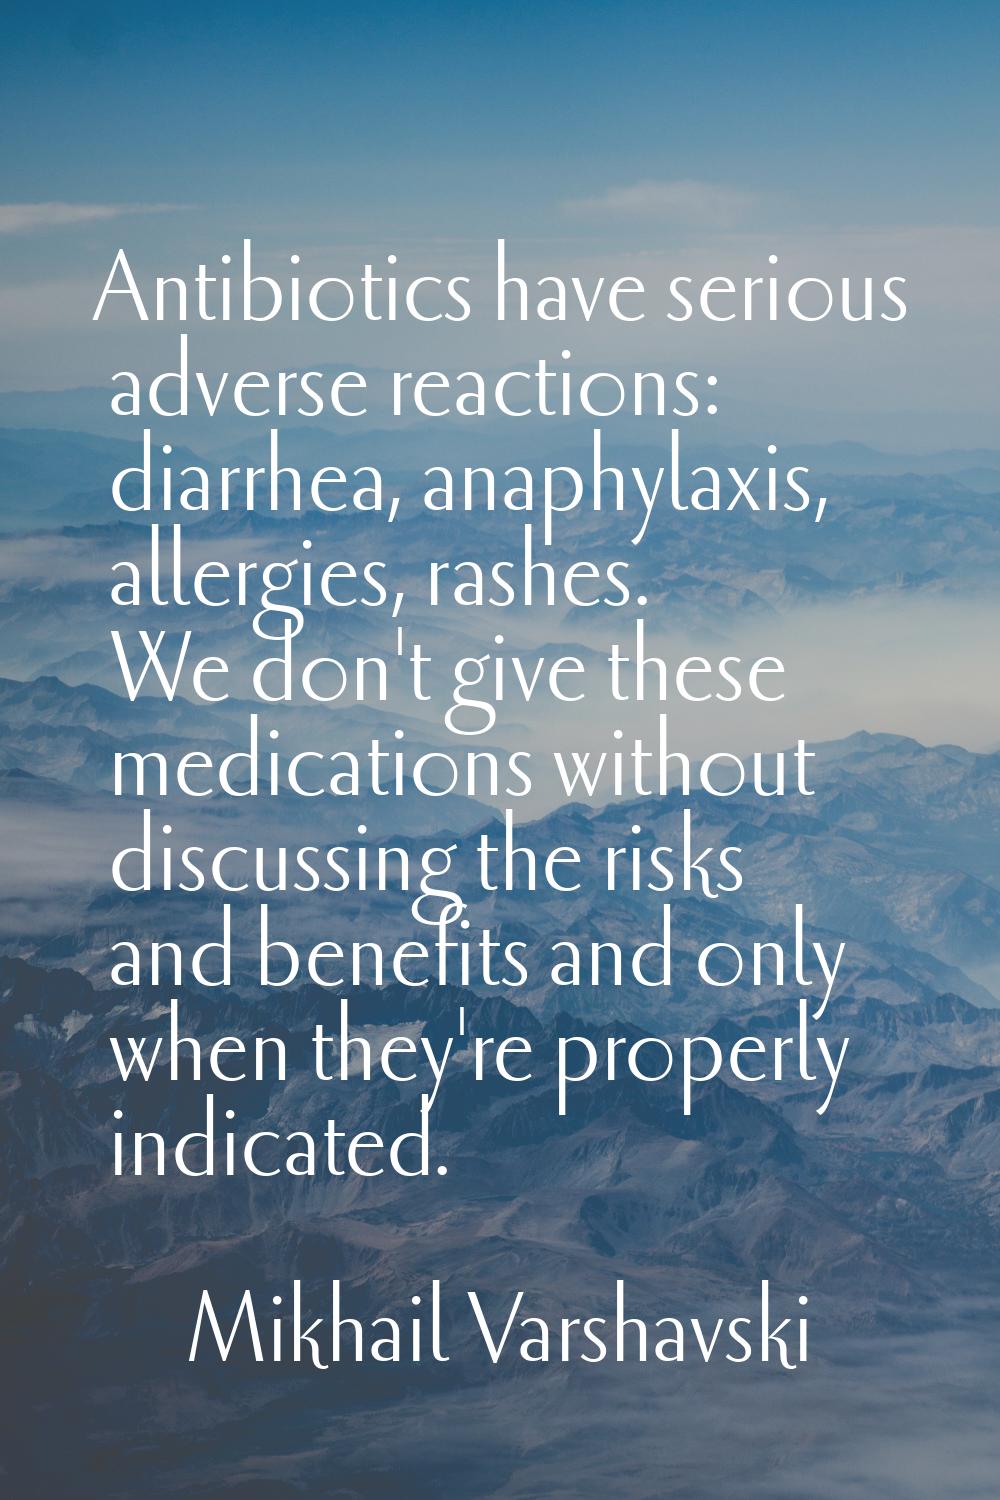 Antibiotics have serious adverse reactions: diarrhea, anaphylaxis, allergies, rashes. We don't give